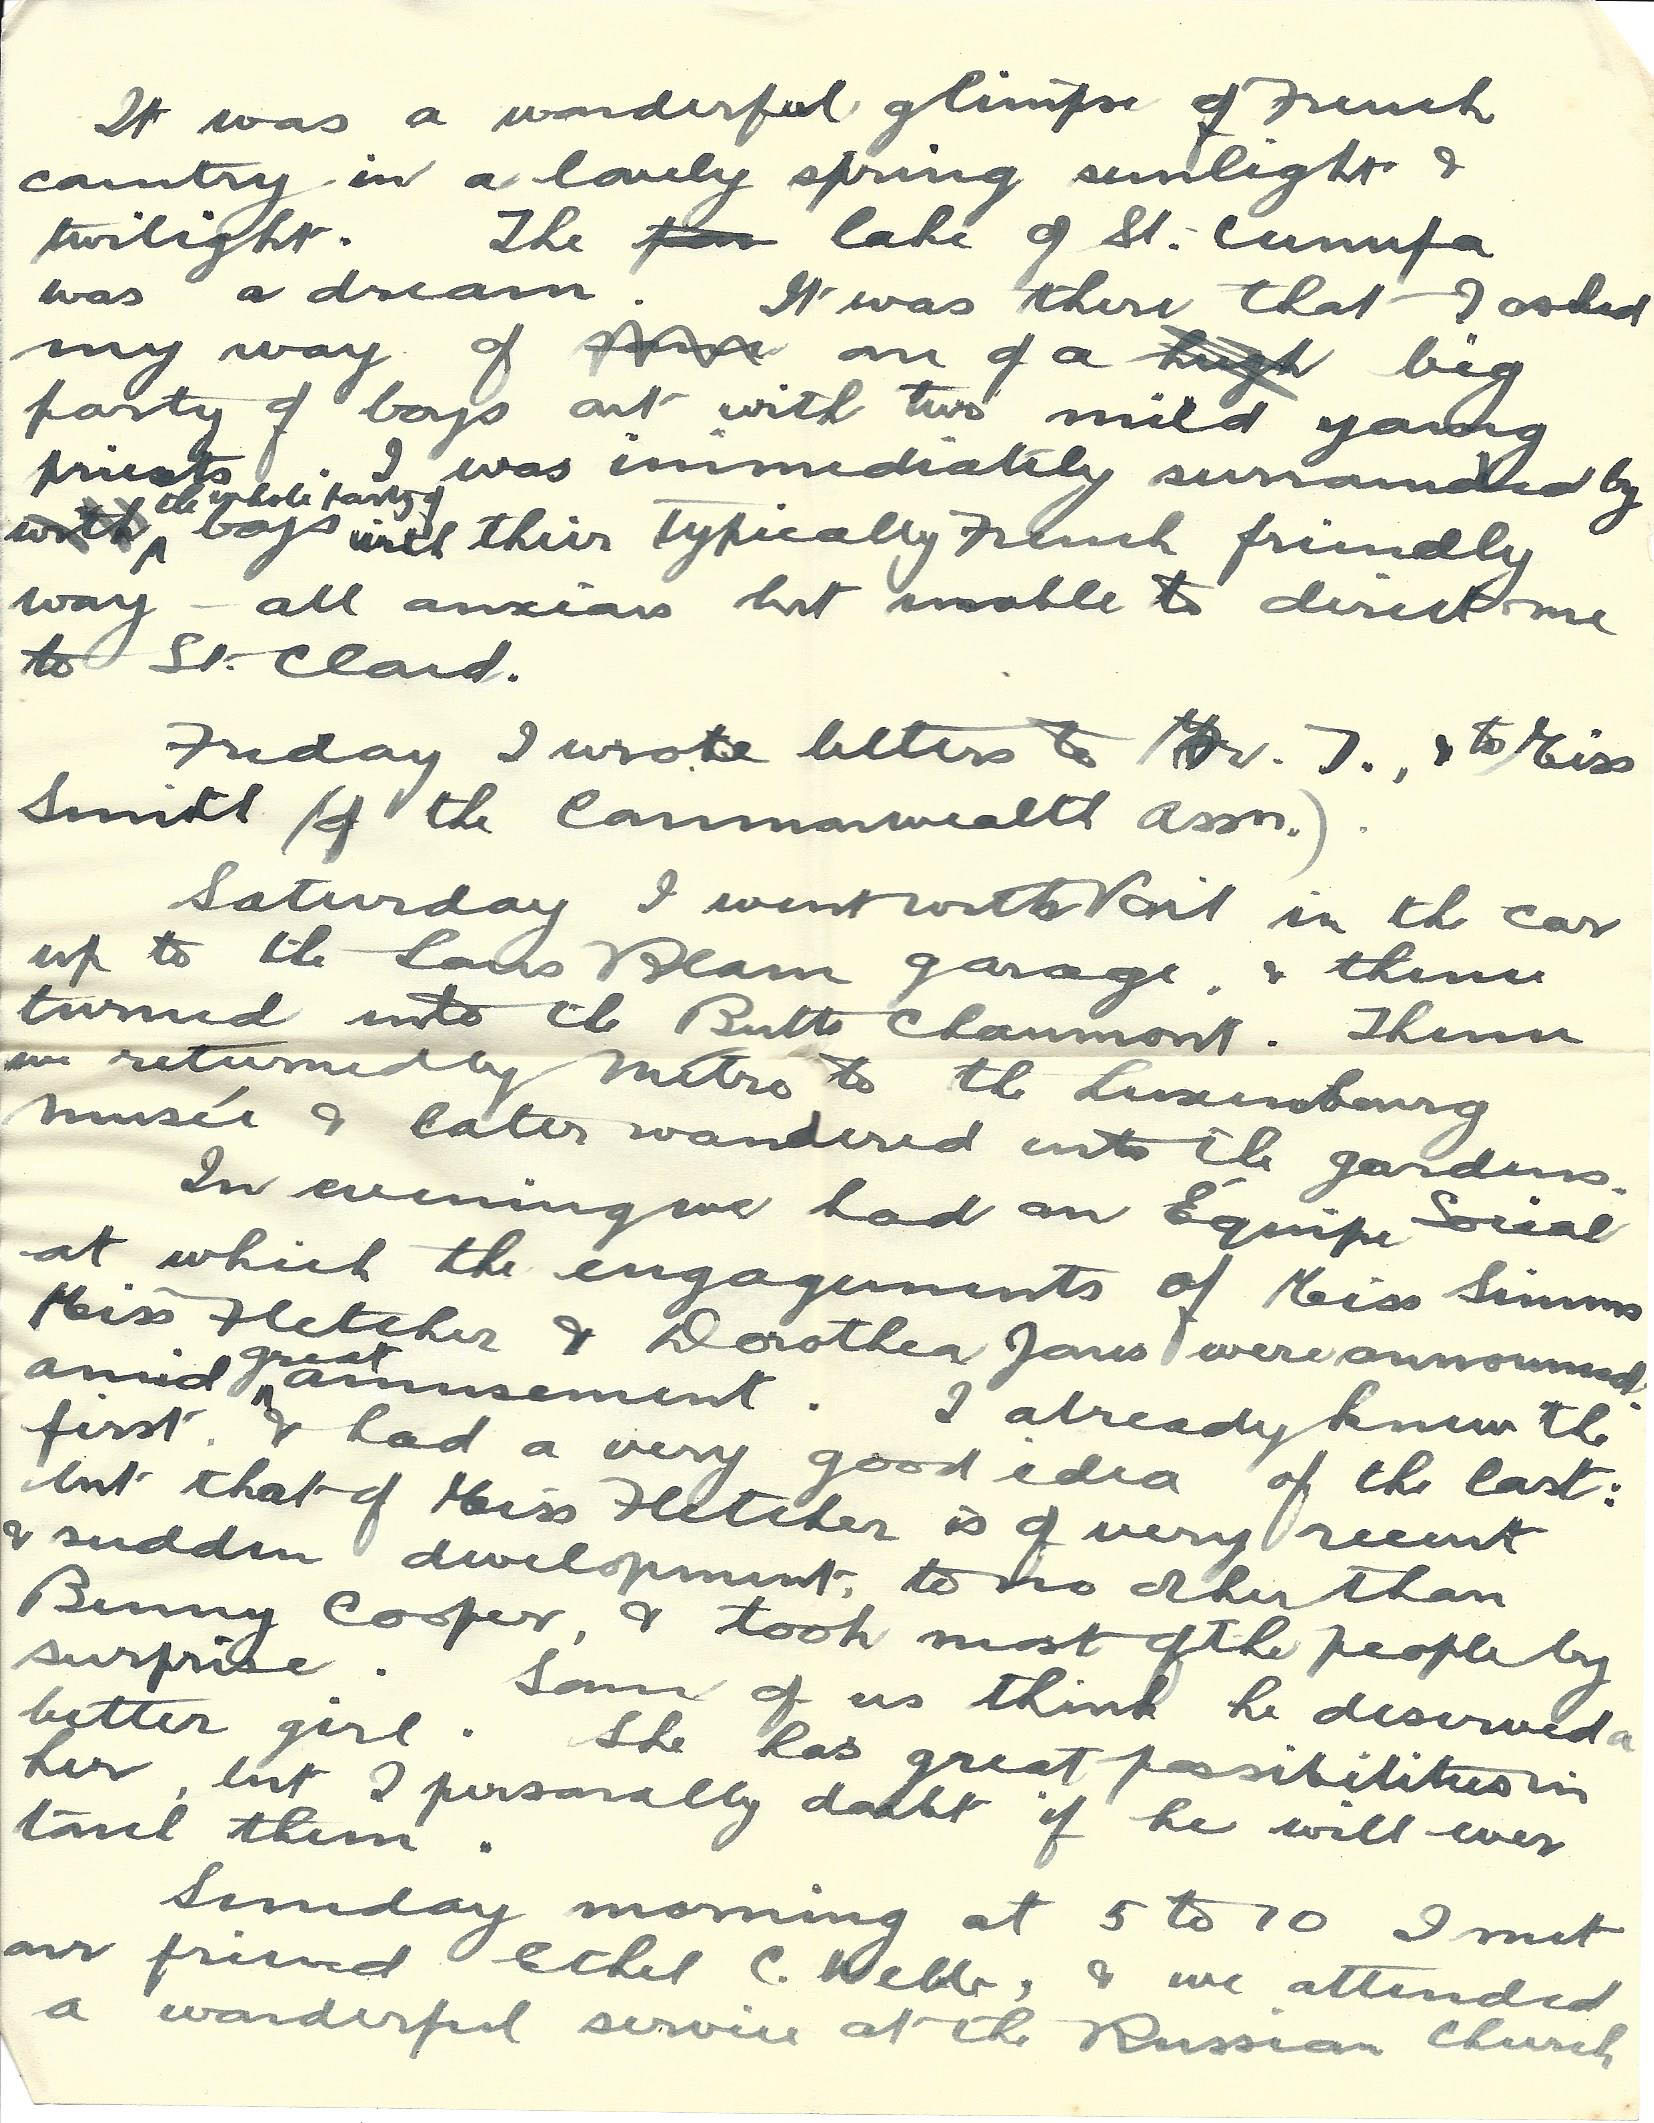 1920-03-08 p2 Donald Bearman letter to his father